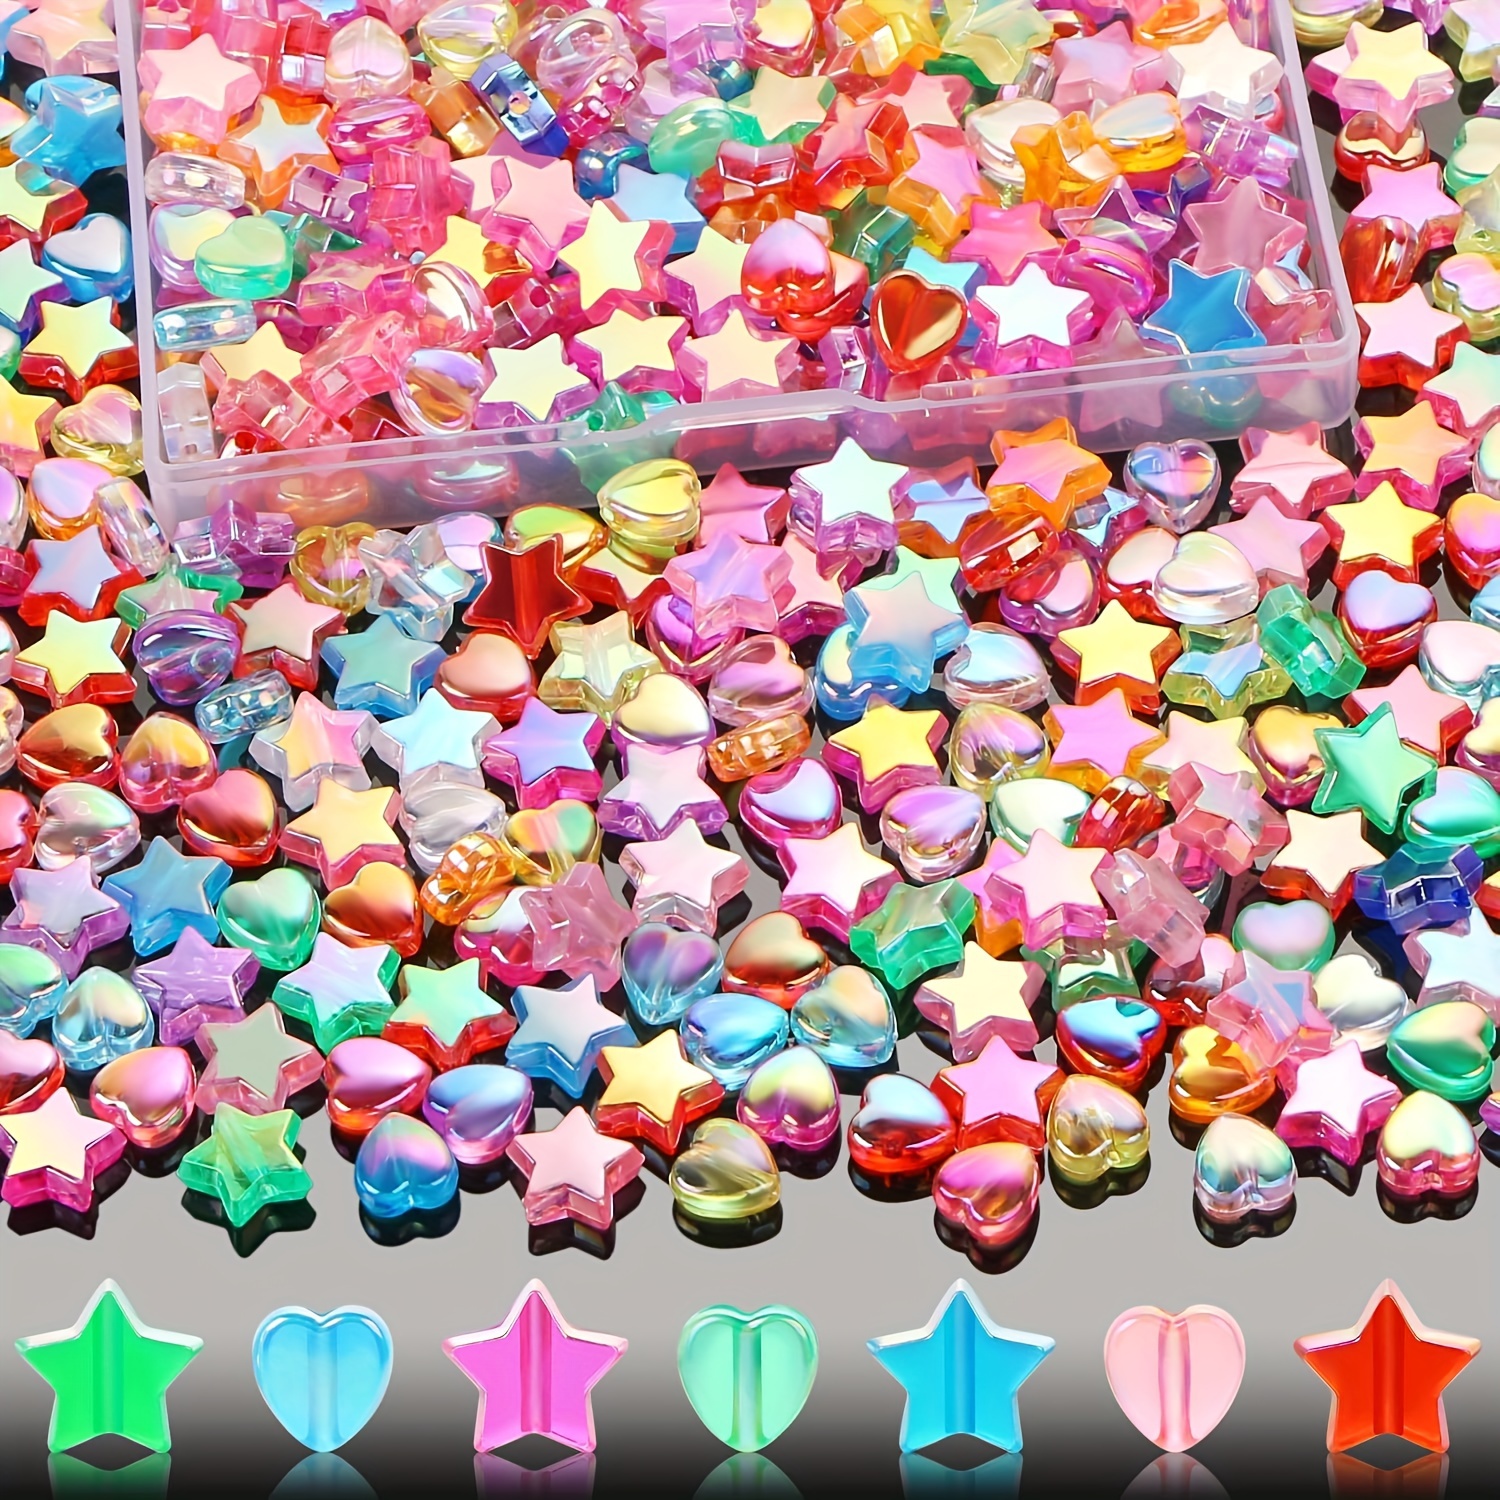 

200pcs Ab Color 10mm Pentagram, 9mm Heart Shape Mixed Style Beads For Jewelry Making Diy Couple Bracelets Necklace Handicrafts Small Business Supplies